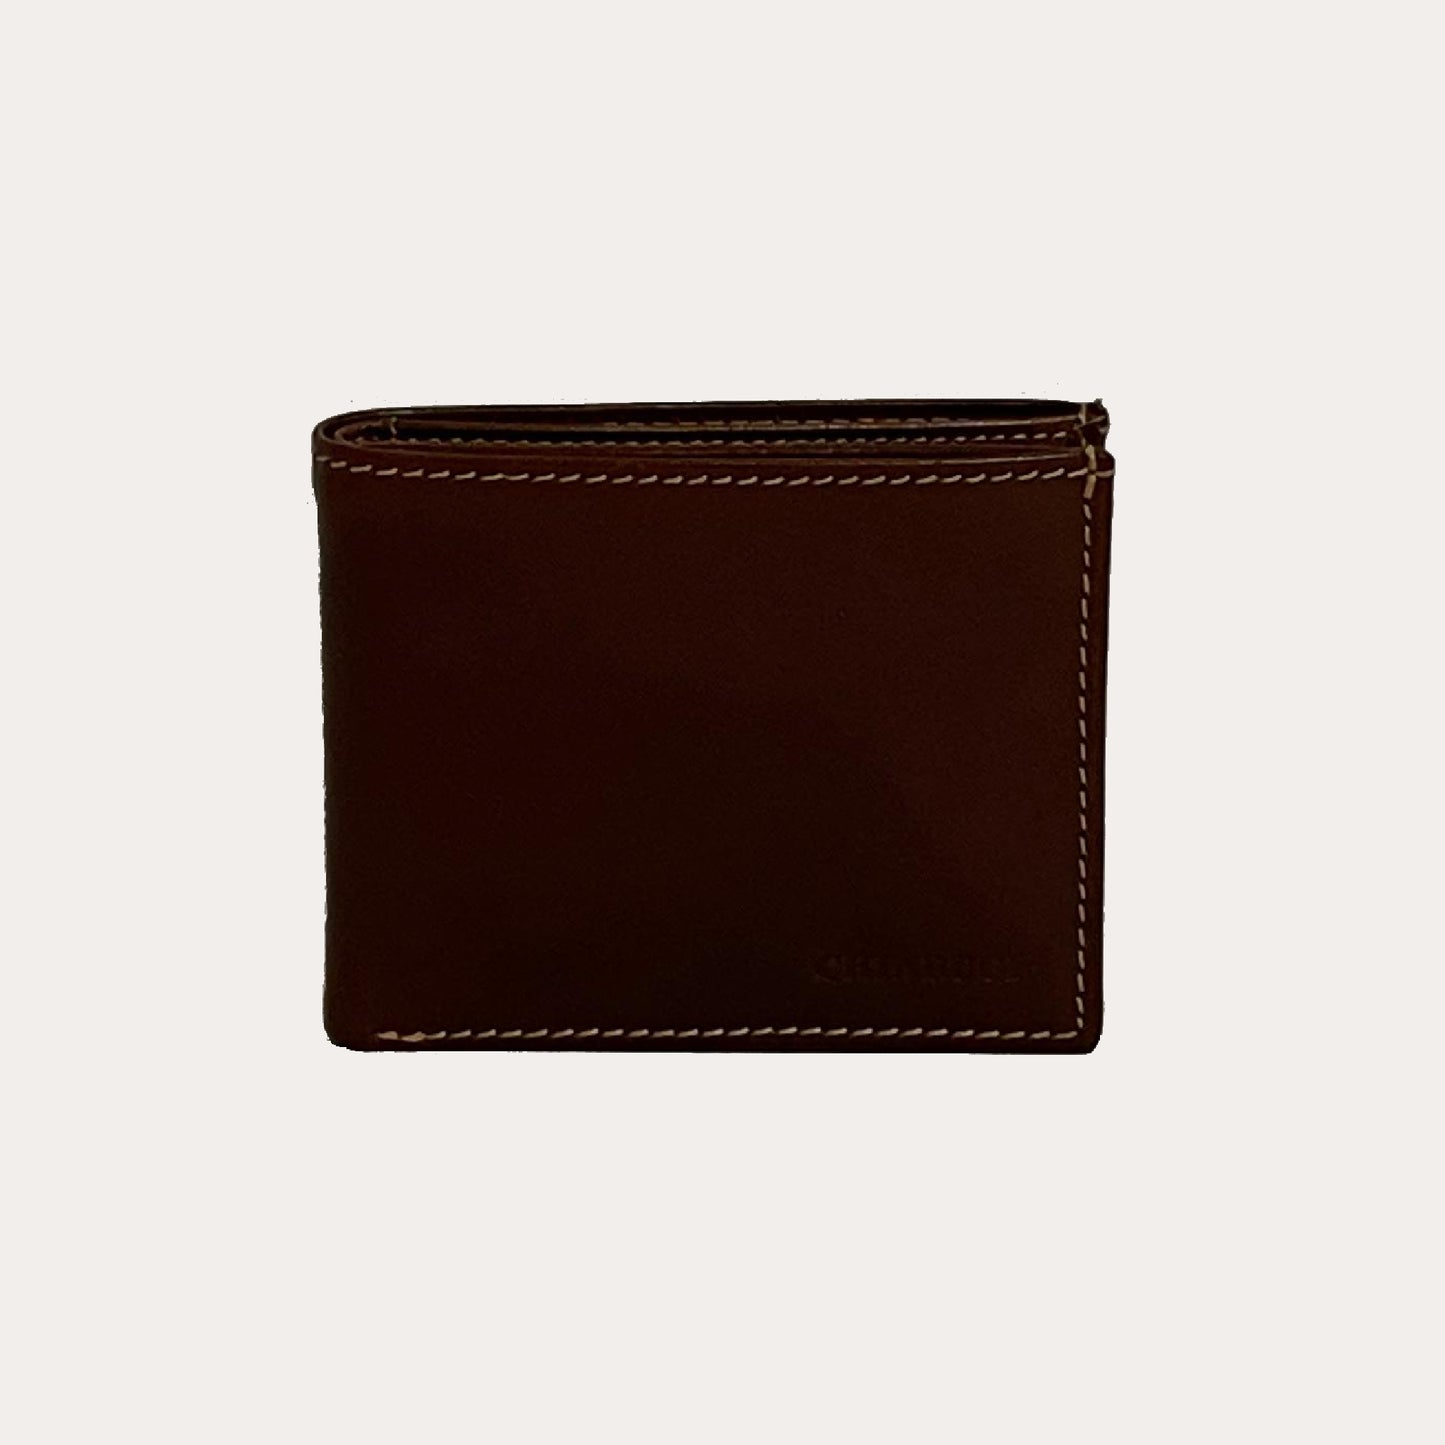 Chiarugi Maroon Leather Wallet-12 Credit Card Sections